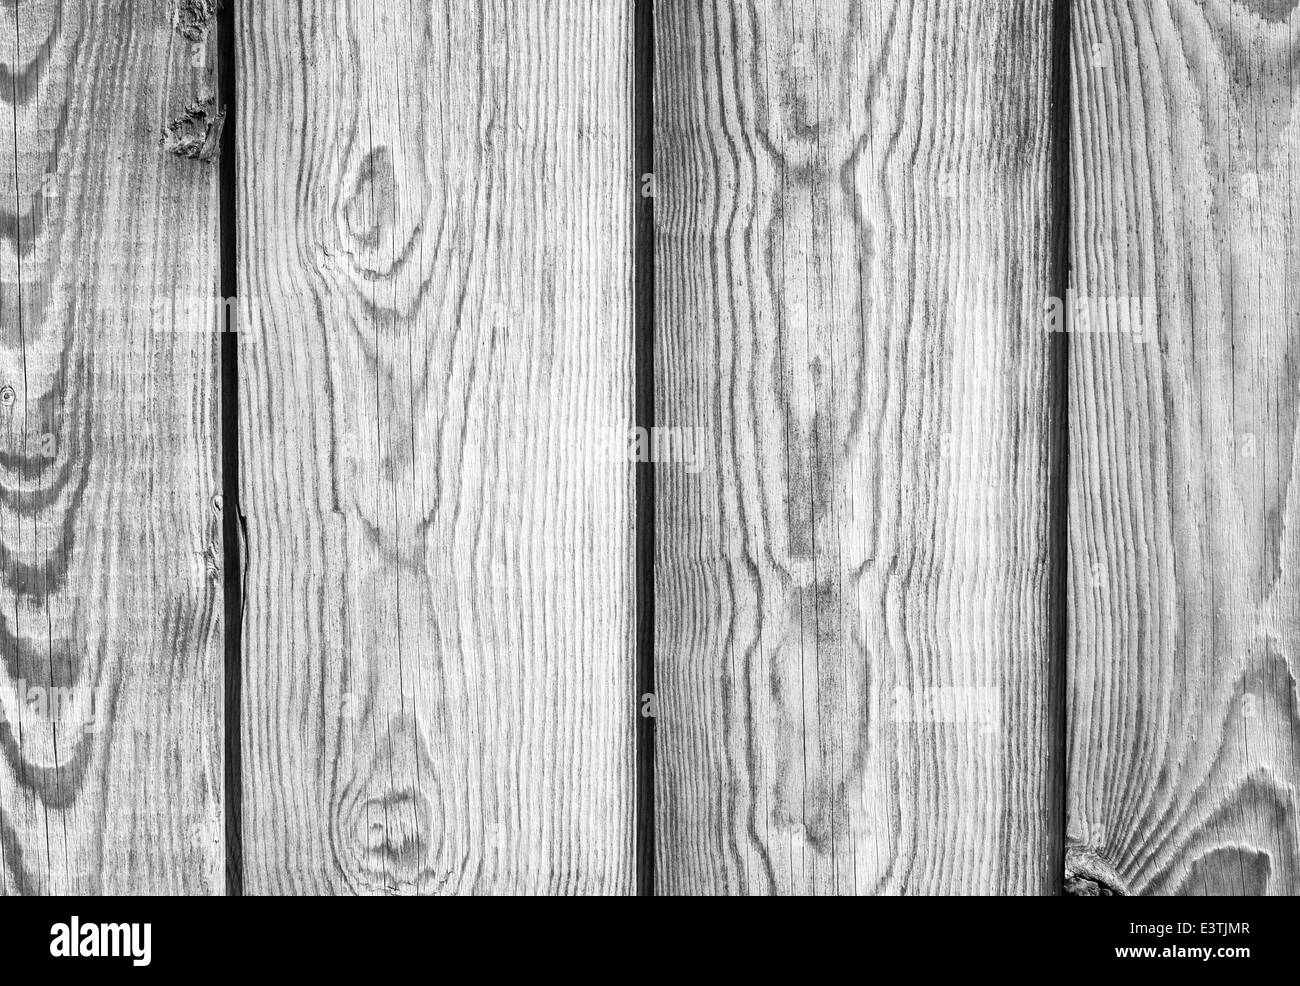 Detailed background texture of old dark wooden wall surface Stock Photo